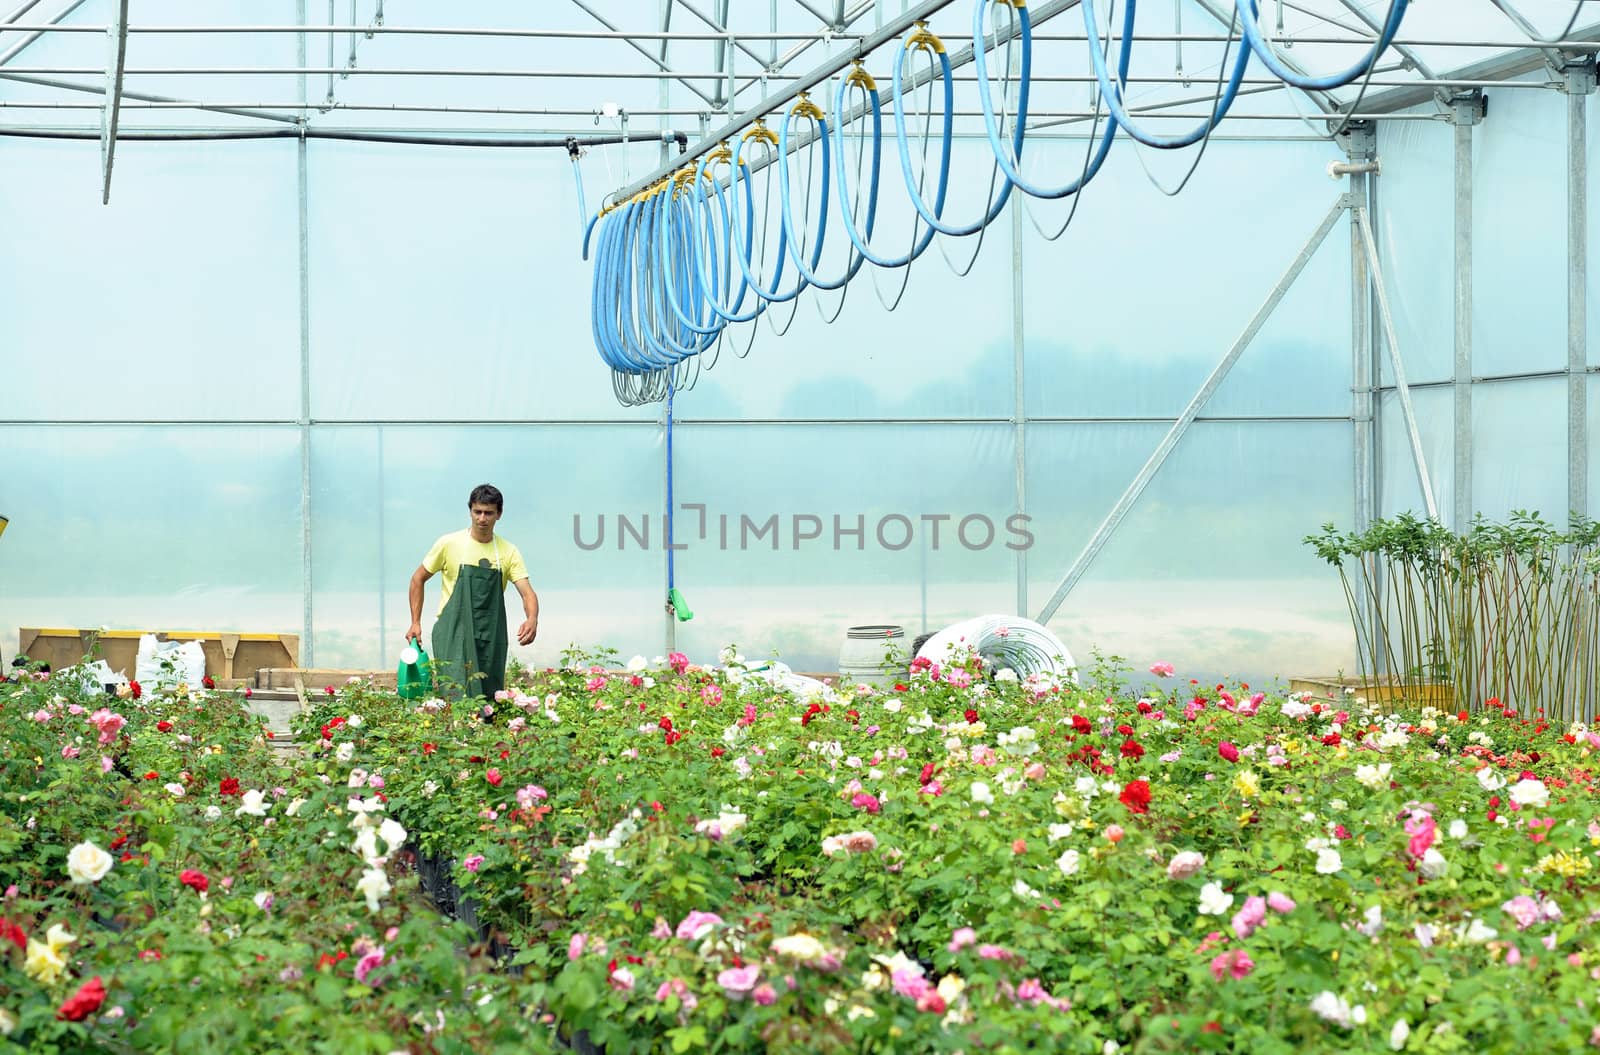 An image of a gardener working in a greenhouse